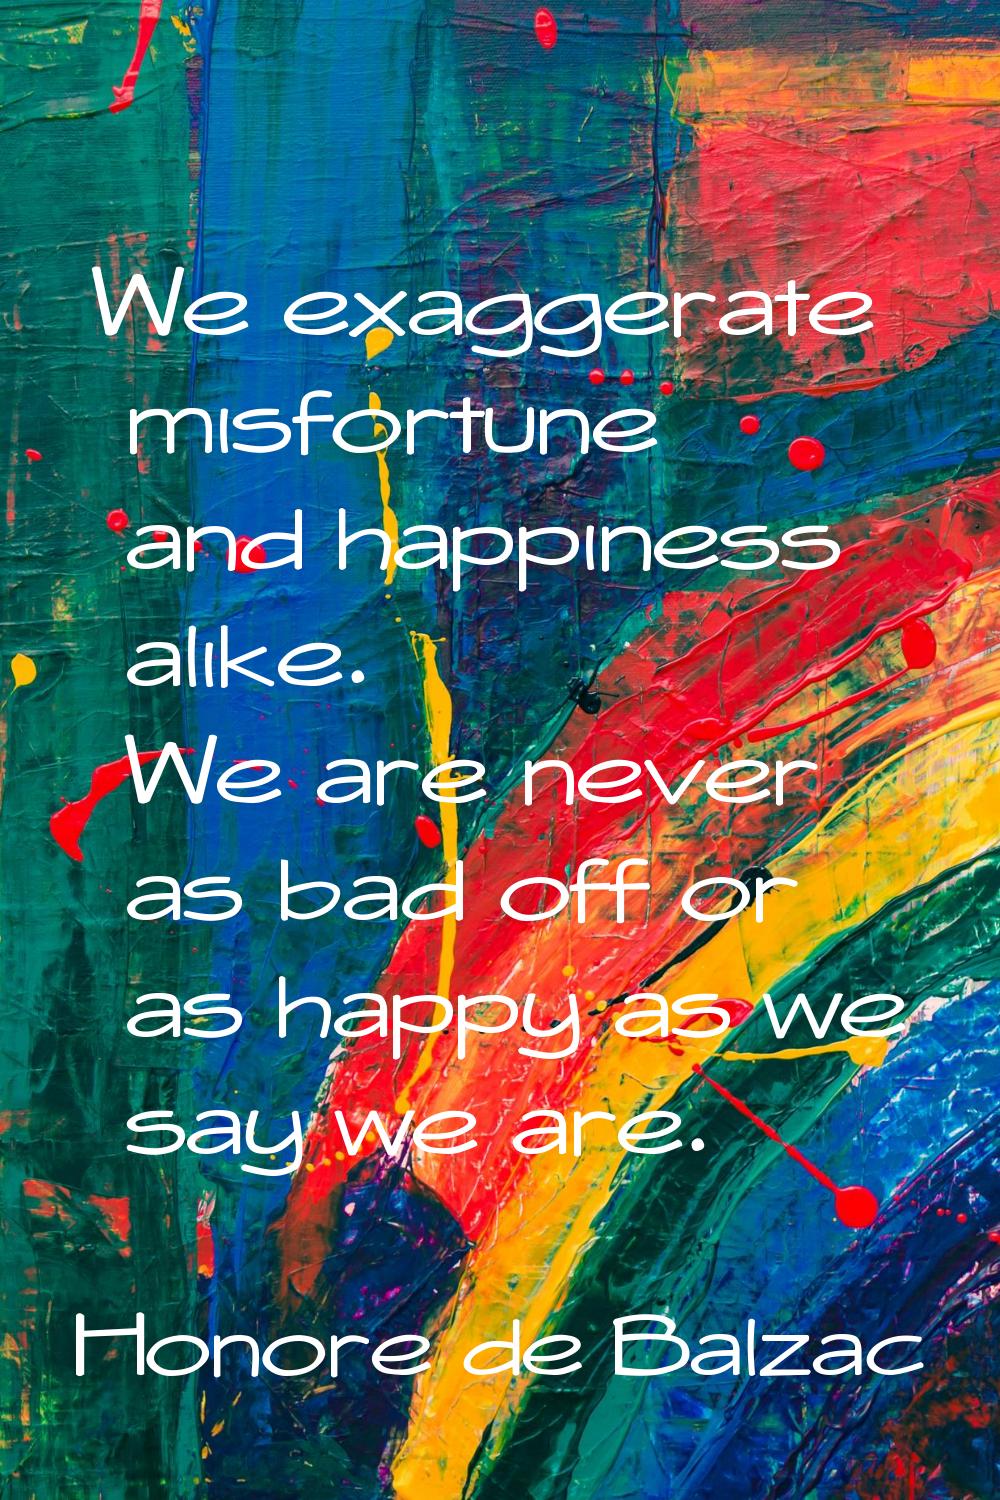 We exaggerate misfortune and happiness alike. We are never as bad off or as happy as we say we are.